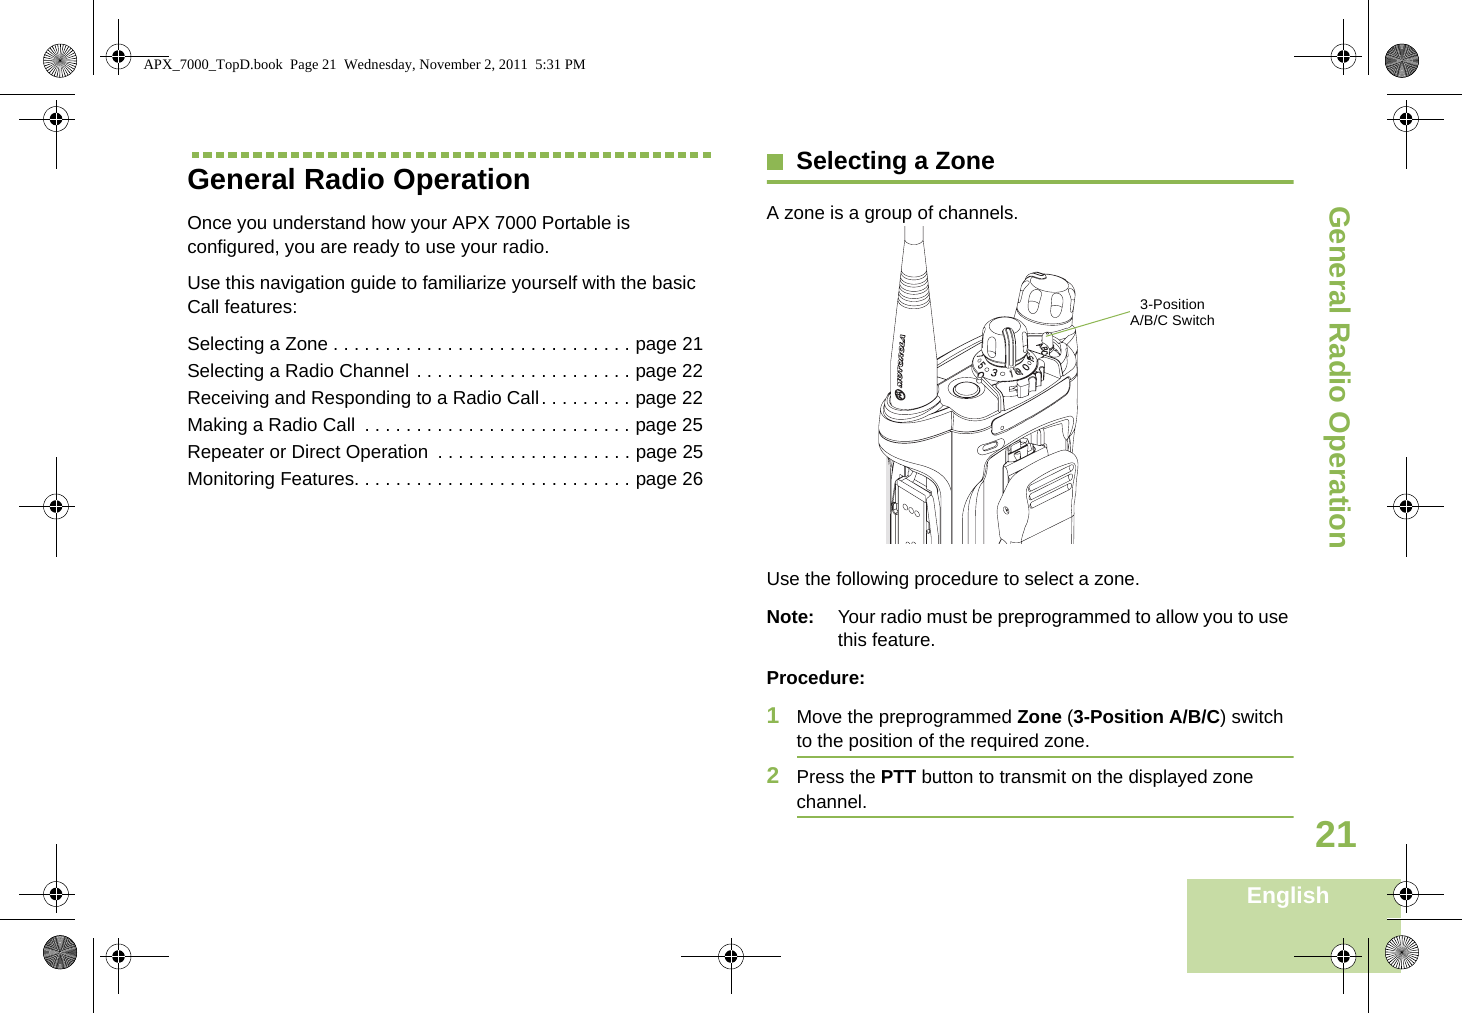 General Radio OperationEnglish21General Radio OperationOnce you understand how your APX 7000 Portable is configured, you are ready to use your radio.Use this navigation guide to familiarize yourself with the basic Call features:Selecting a Zone . . . . . . . . . . . . . . . . . . . . . . . . . . . . . page 21Selecting a Radio Channel . . . . . . . . . . . . . . . . . . . . . page 22Receiving and Responding to a Radio Call. . . . . . . . . page 22Making a Radio Call  . . . . . . . . . . . . . . . . . . . . . . . . . . page 25Repeater or Direct Operation  . . . . . . . . . . . . . . . . . . . page 25Monitoring Features. . . . . . . . . . . . . . . . . . . . . . . . . . . page 26Selecting a ZoneA zone is a group of channels.    Use the following procedure to select a zone.Note: Your radio must be preprogrammed to allow you to use this feature.Procedure:1Move the preprogrammed Zone (3-Position A/B/C) switch to the position of the required zone.2Press the PTT button to transmit on the displayed zone channel.  3-Position A/B/C SwitchAPX_7000_TopD.book  Page 21  Wednesday, November 2, 2011  5:31 PM